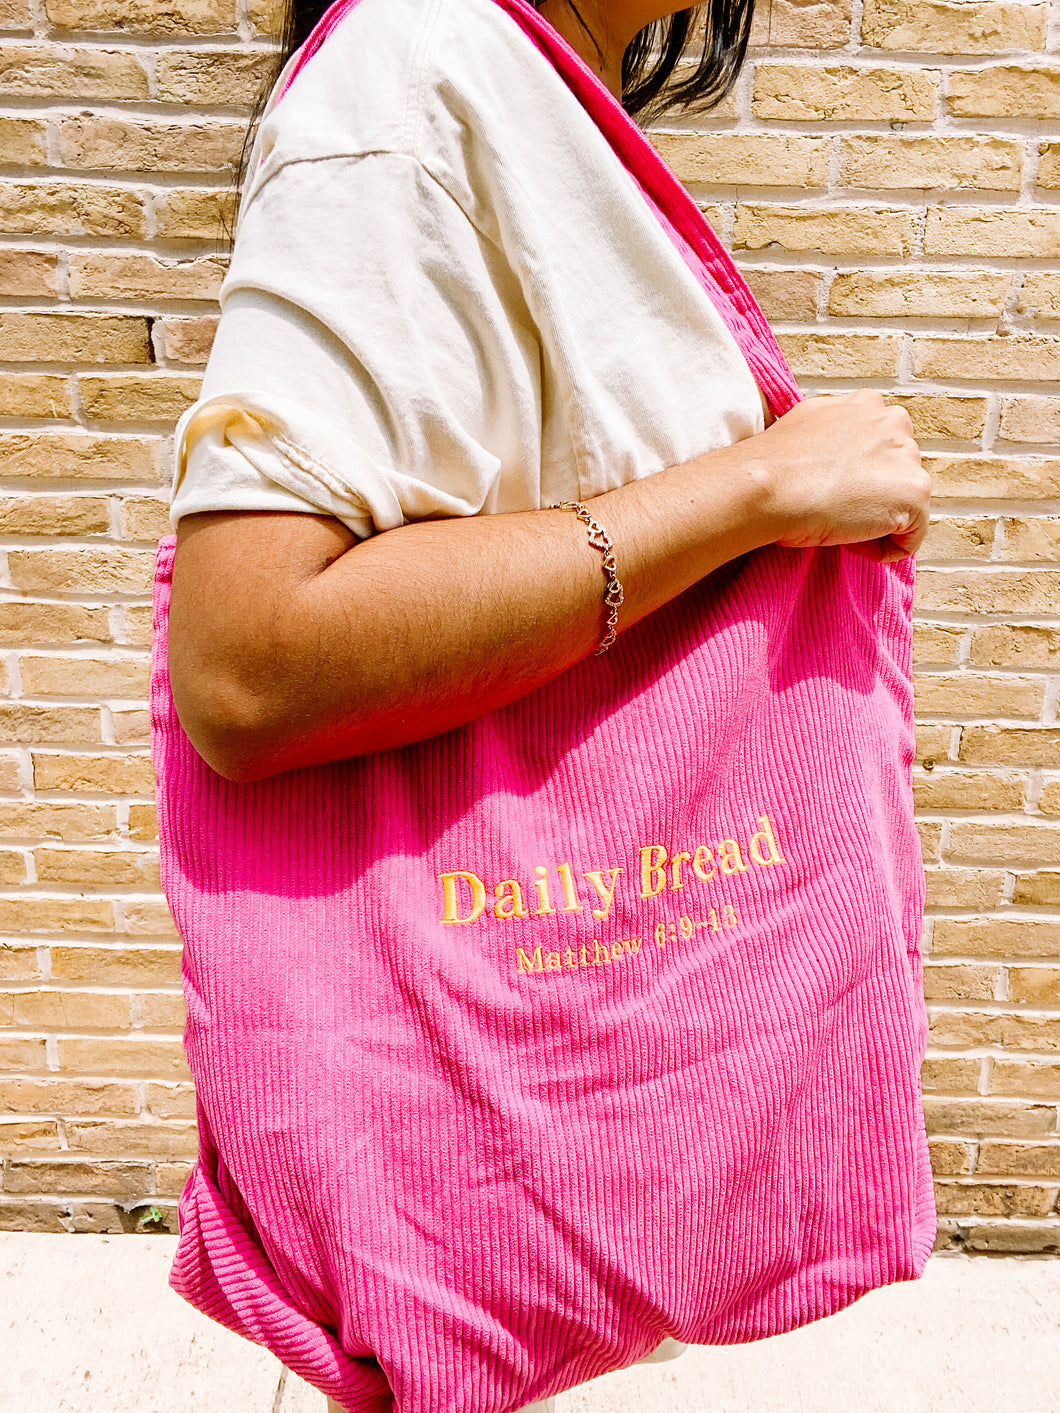 Daily Bread Bag Corduroy | Embroidered